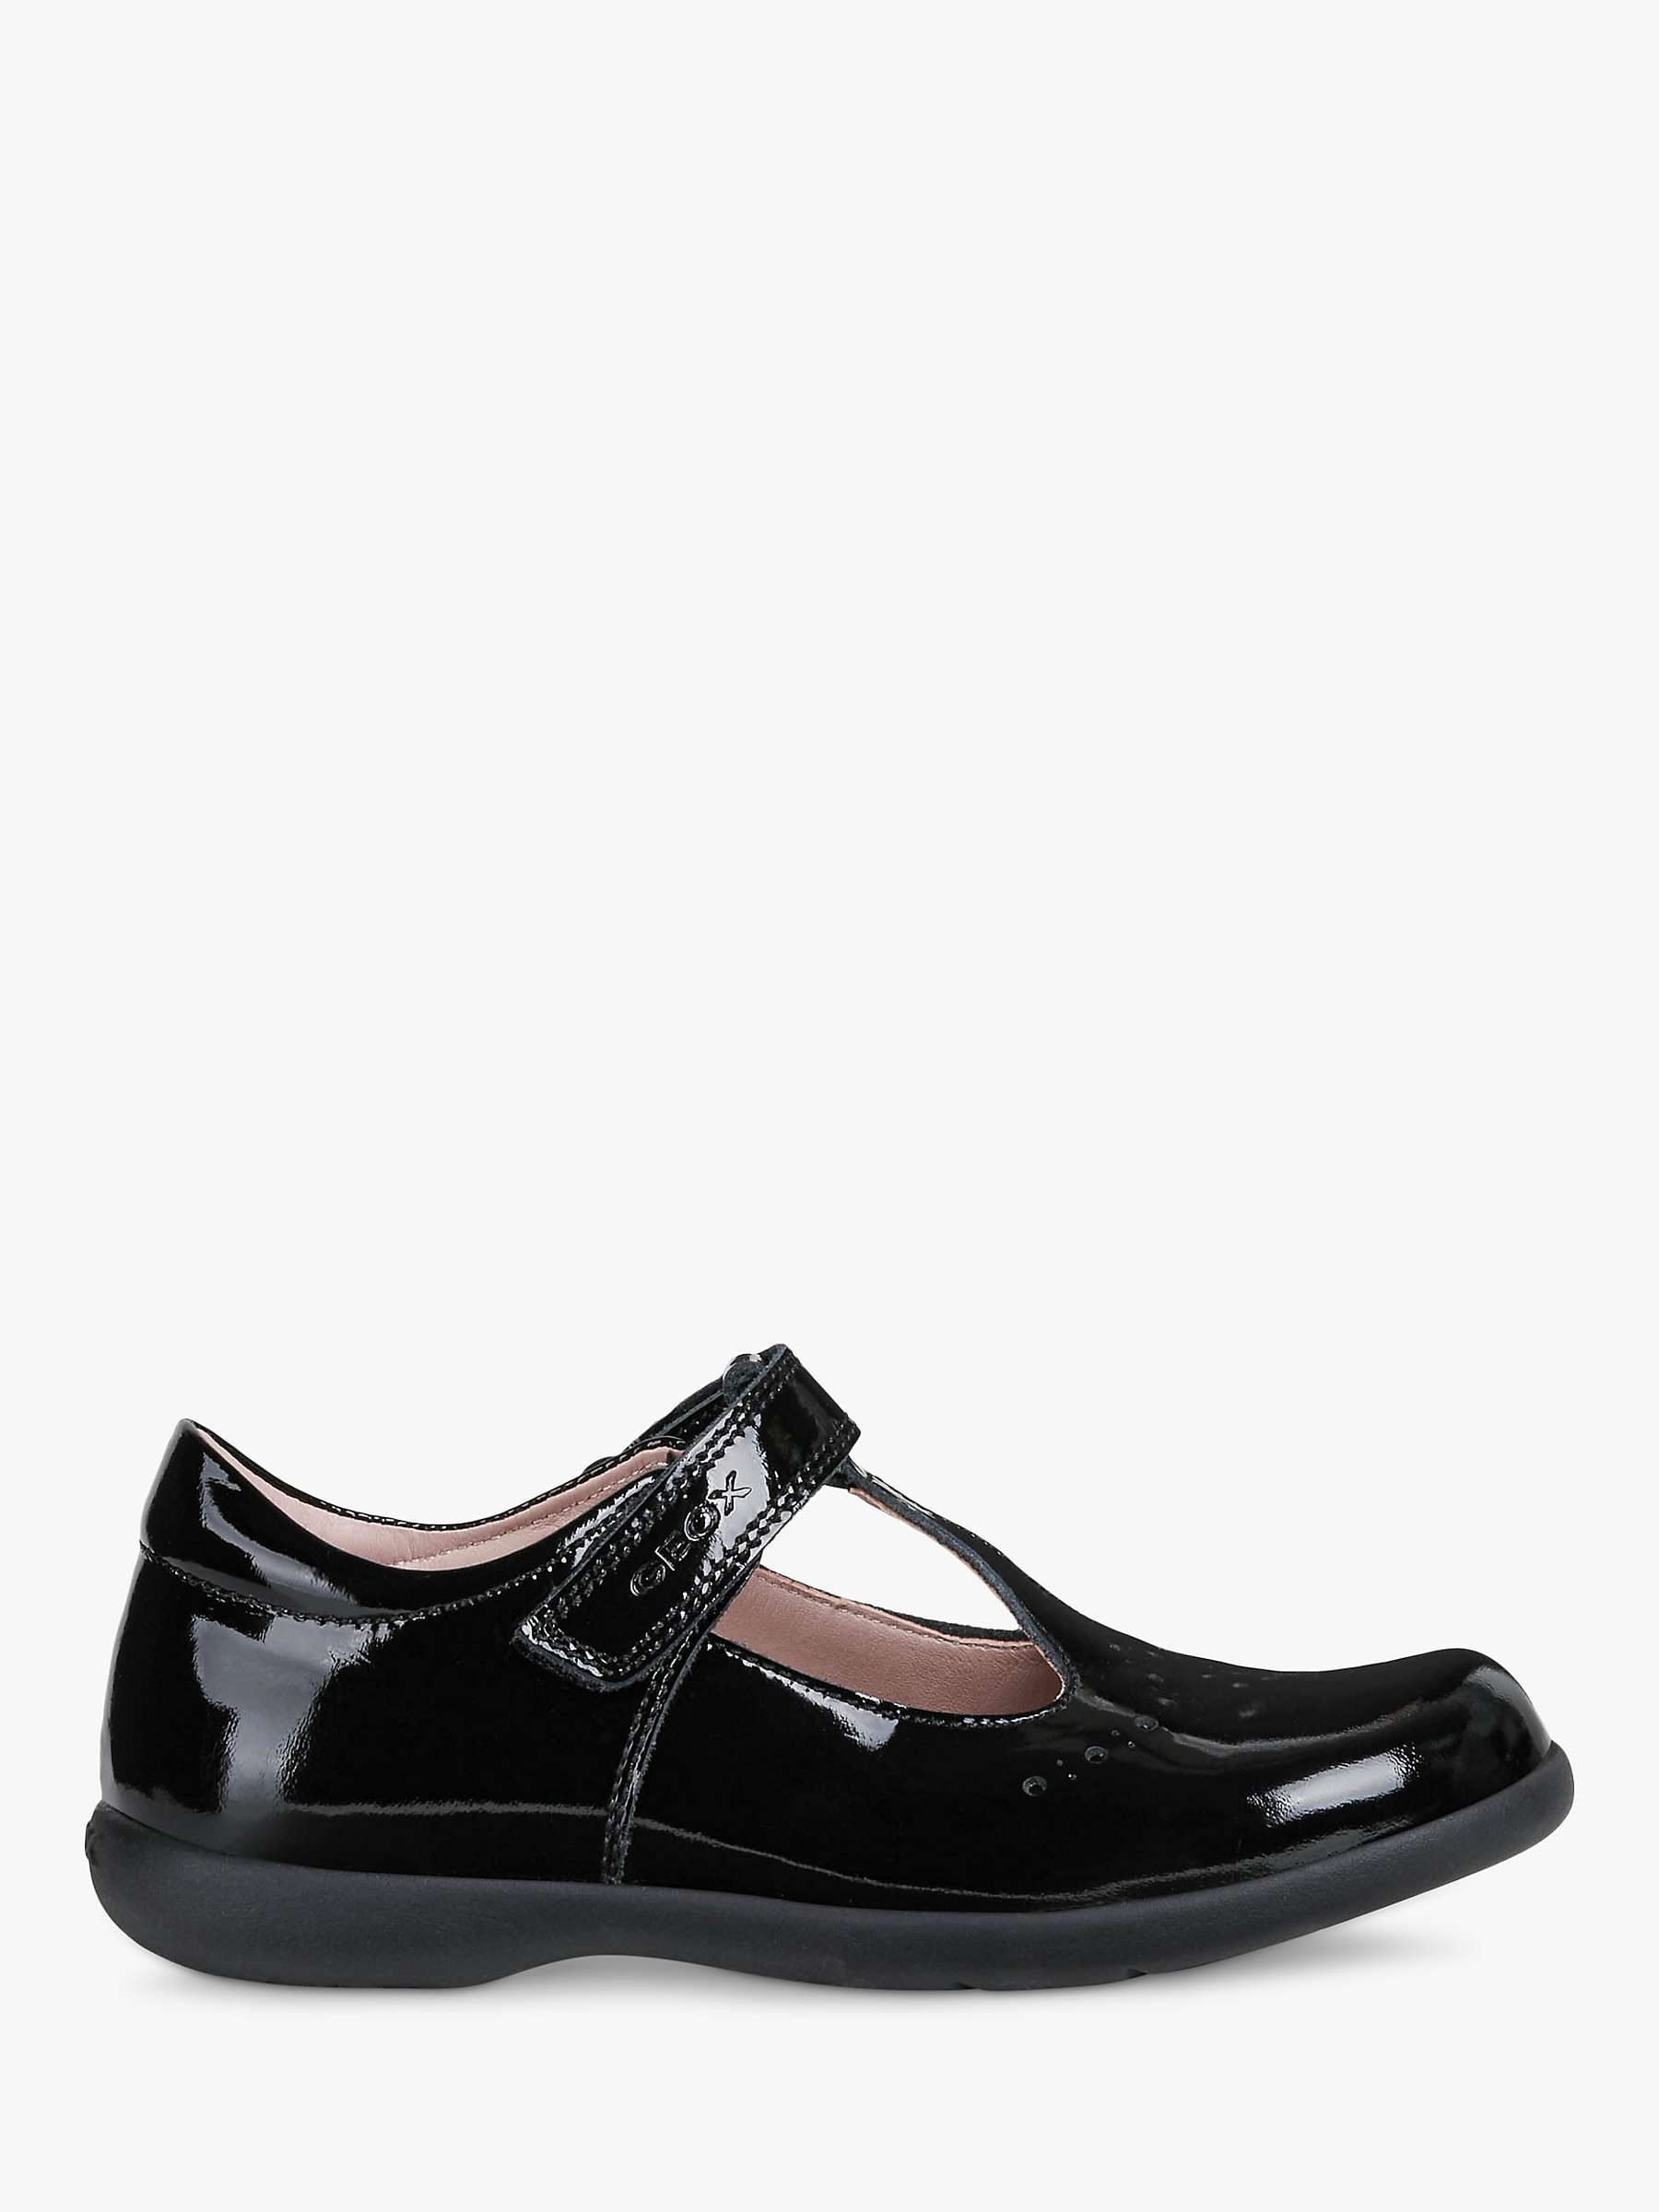 Buy Geox Kids' Naimara Patent Leather T-Bar School Shoes Online at johnlewis.com